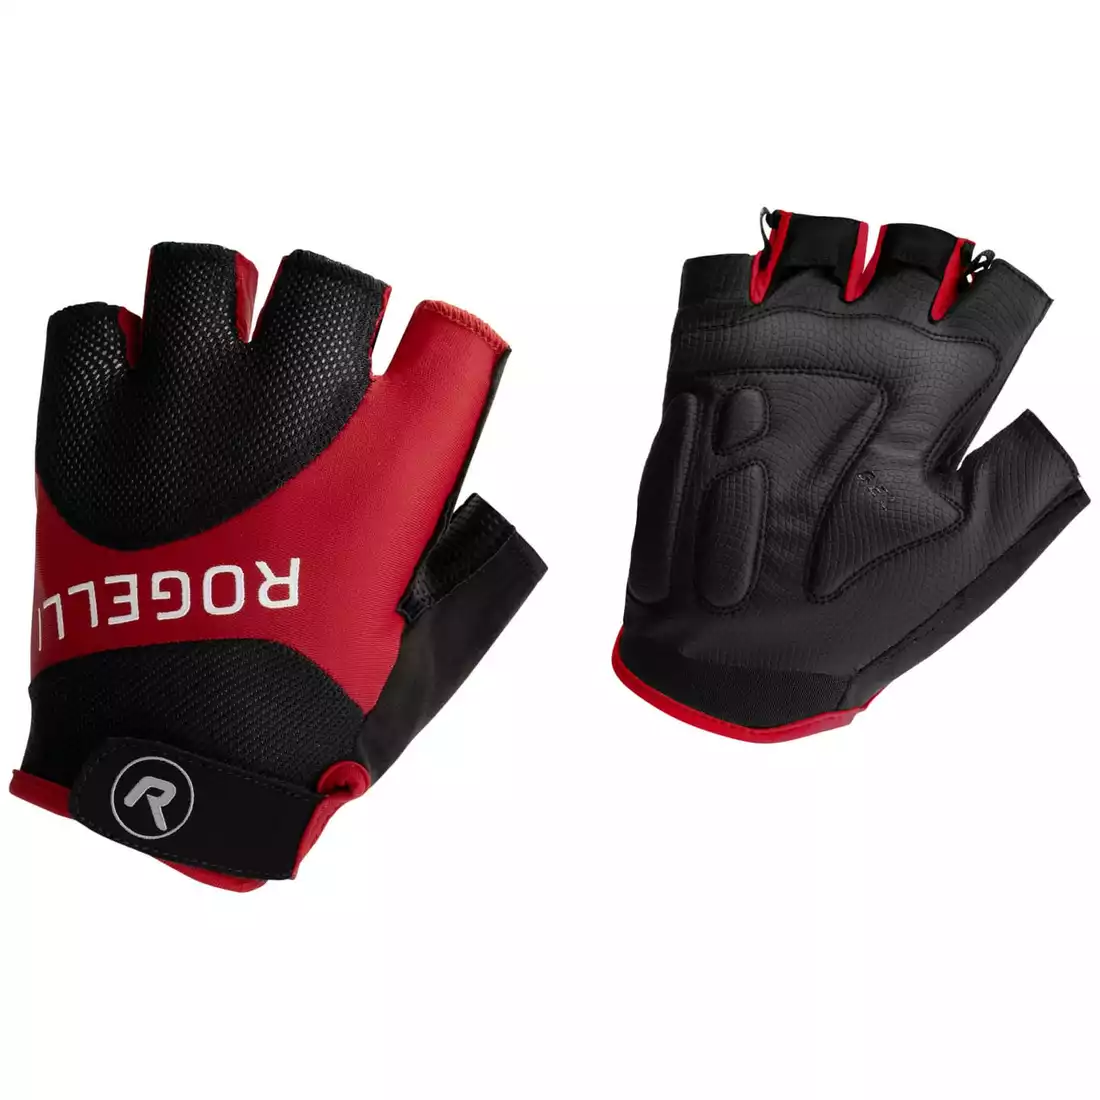 ROGELLI ARIOS 2 Men's cycling gloves, black and red